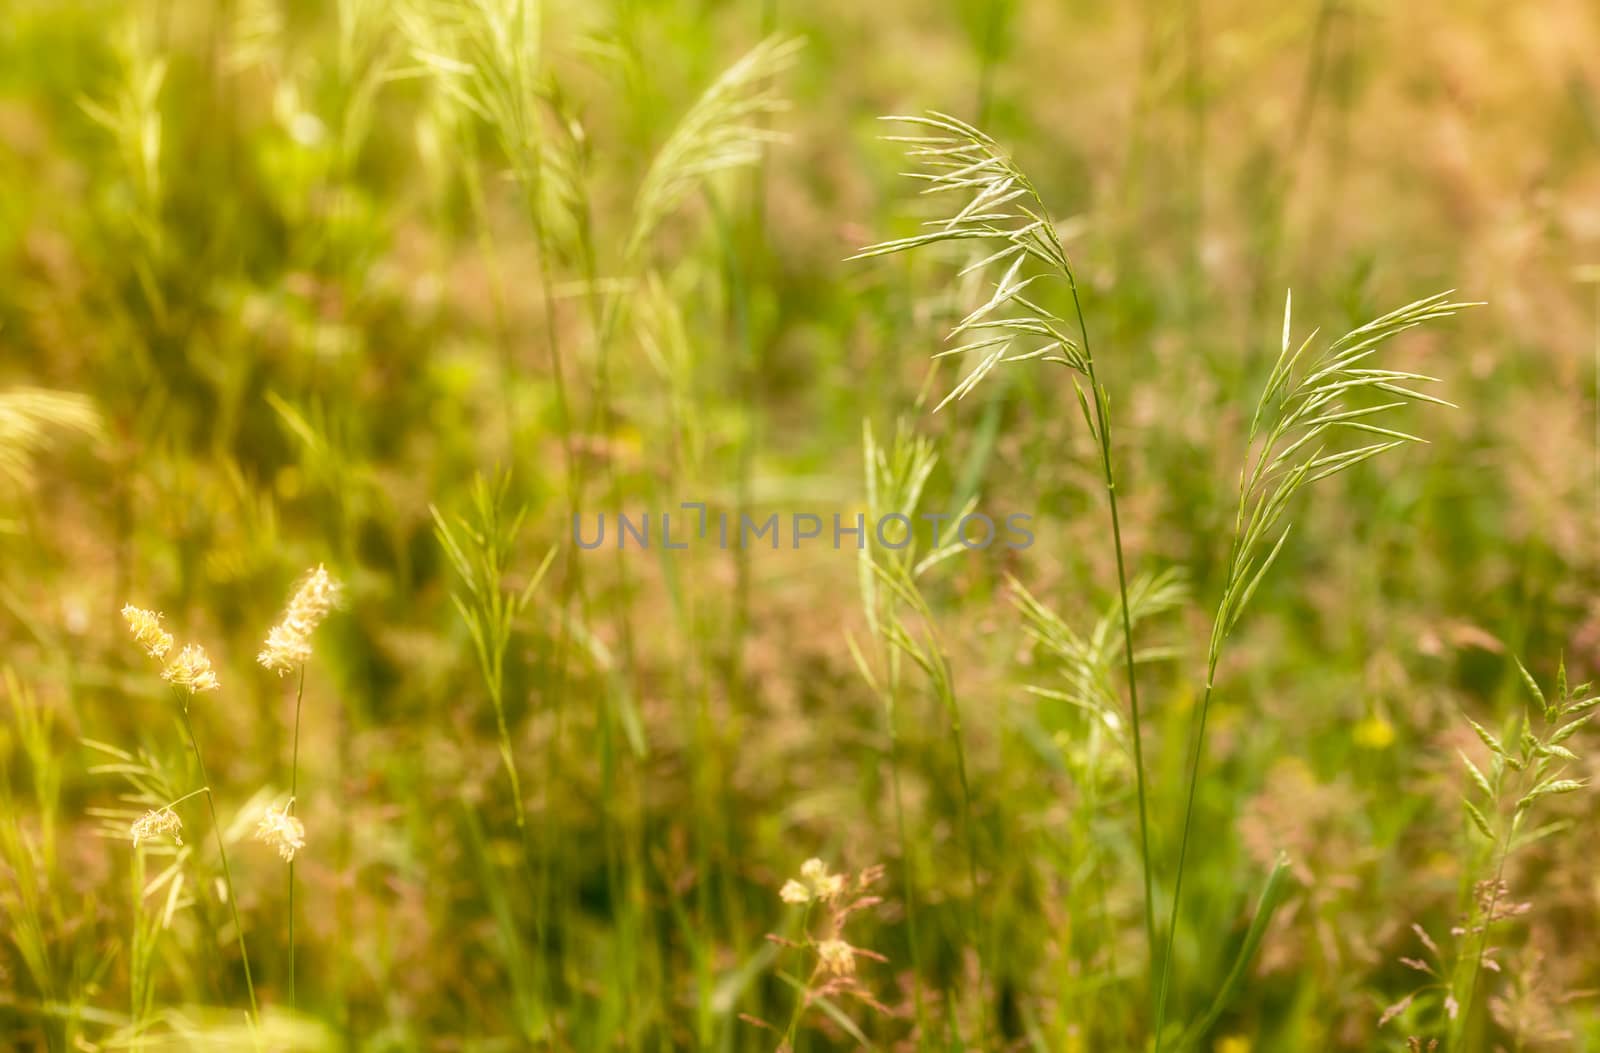 Spartina pectinata  moved by the wind in a meadow  under the warm spring sun